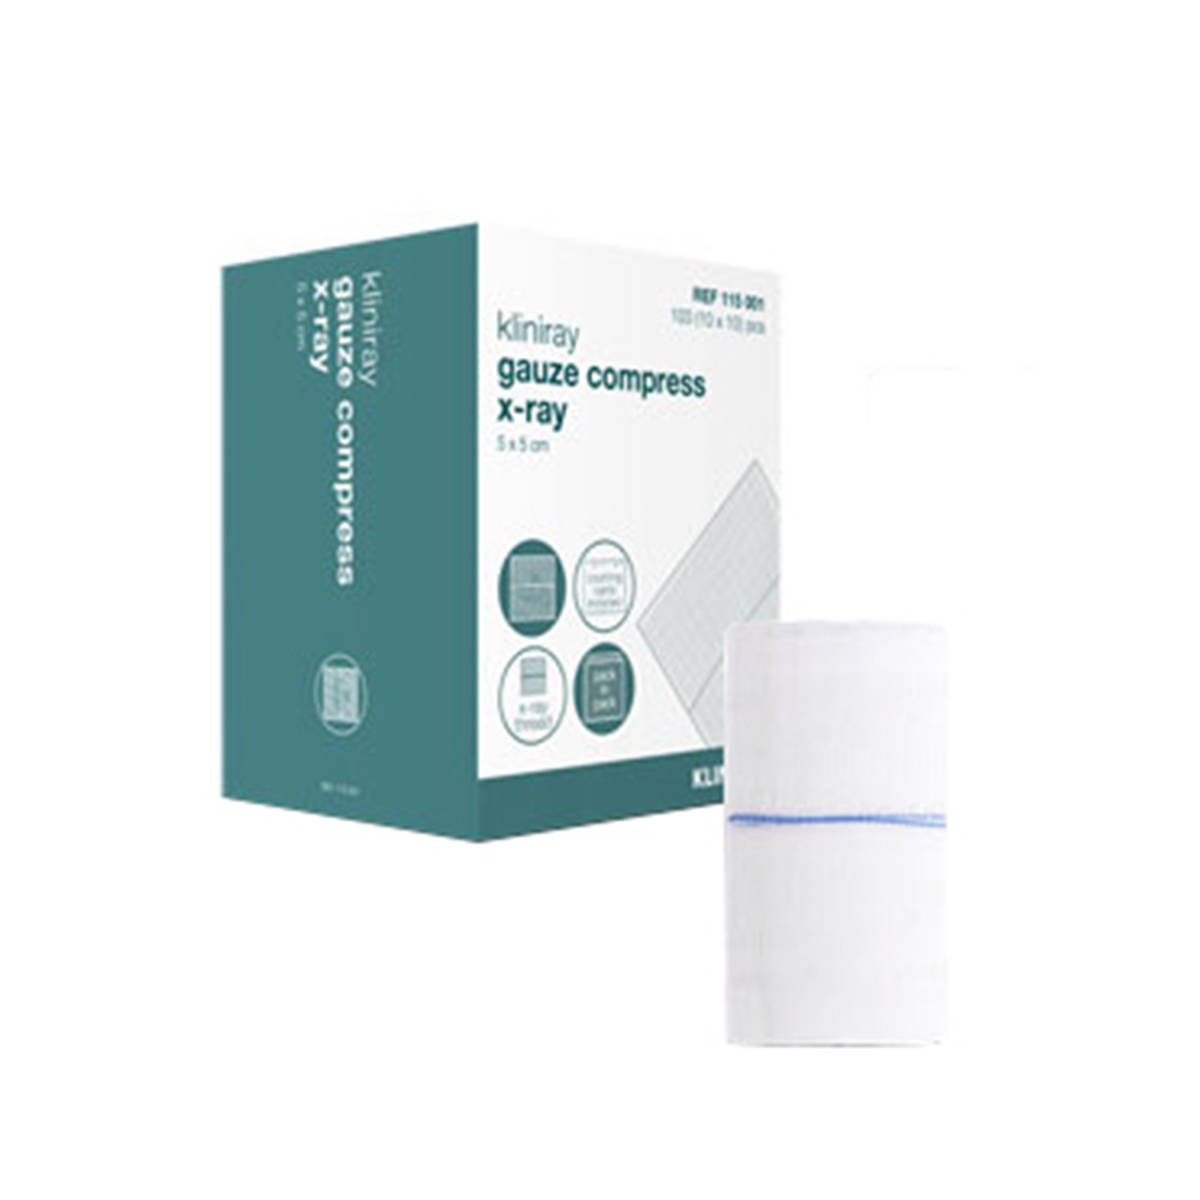 Hydrophilic gauze compress with x-ray detectable thread